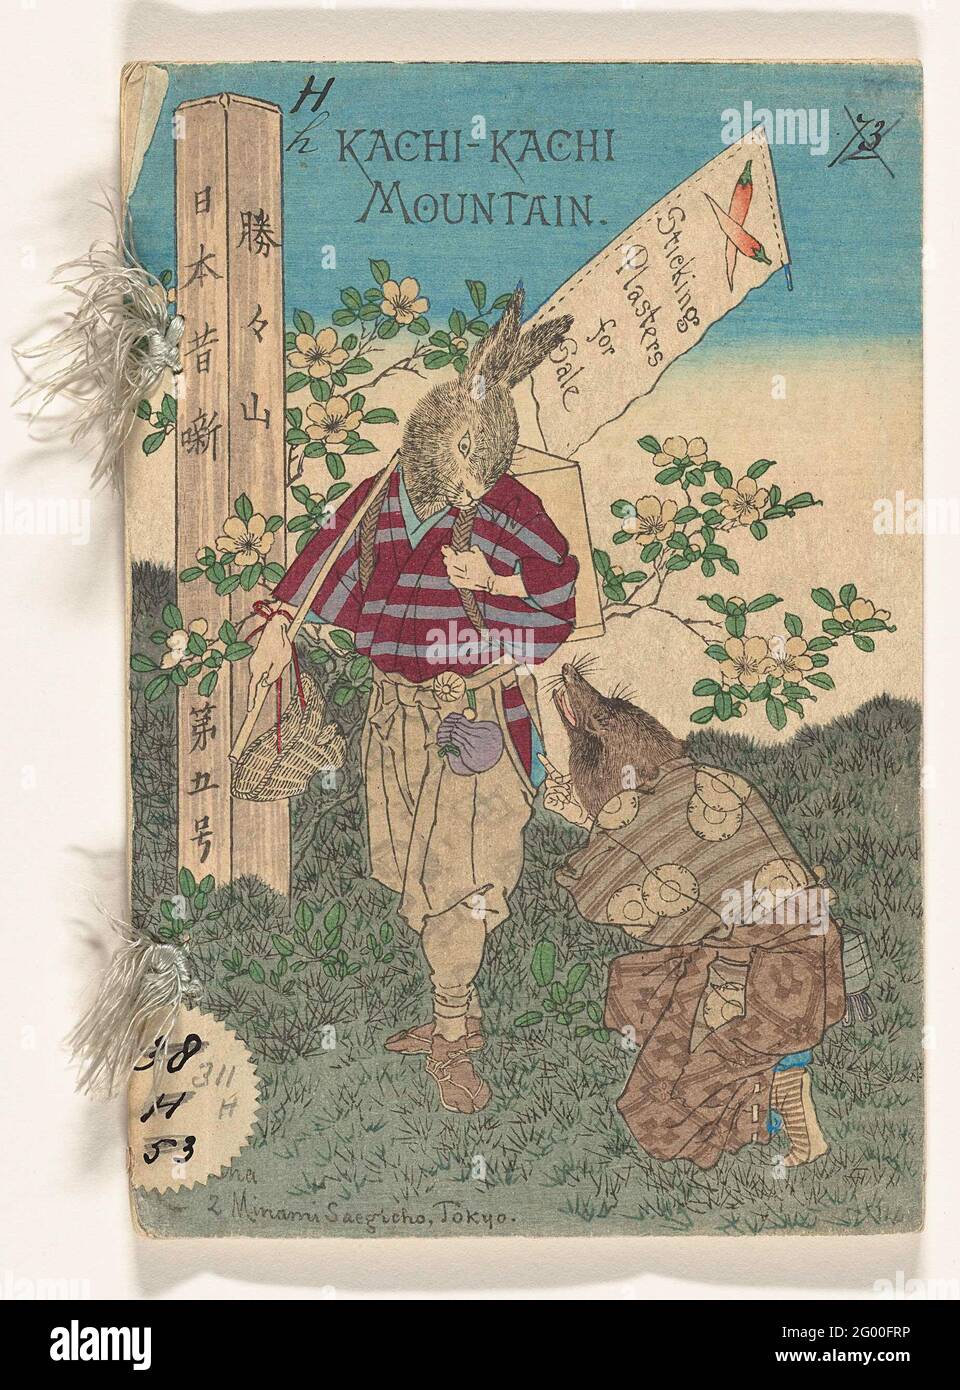 Kaki-Kachi Mountain; Japanese fairy tales set; Japanese Fairy Tale Series.  Number 5 from the series: the Japanese fairy tale Kaki-Kachi Mountain, in  English; cover with title and image of decorated mole and